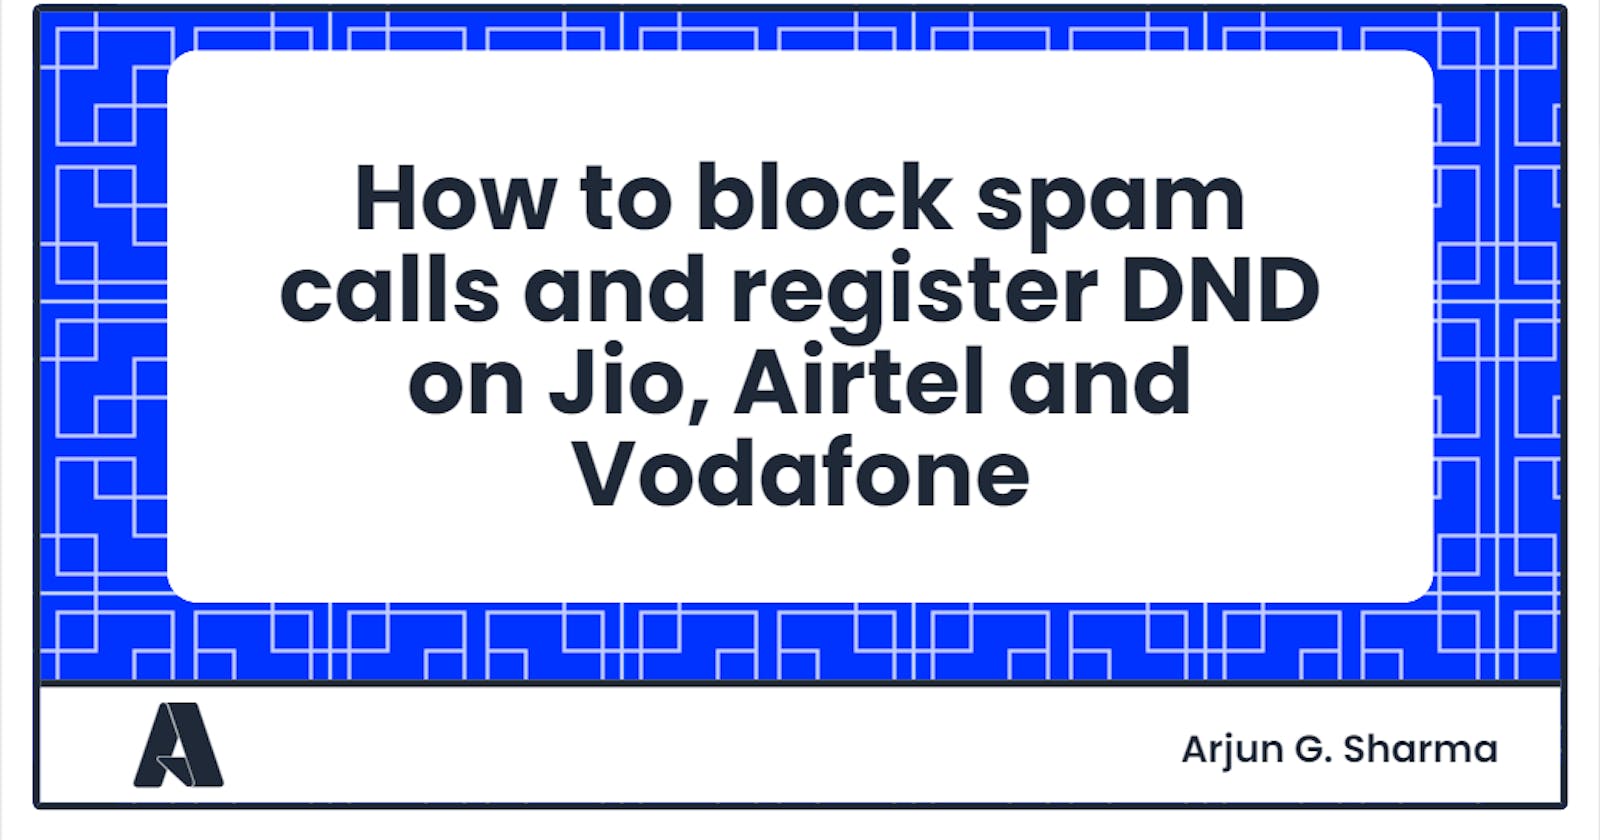 How to block spam calls and register DND on Jio, Airtel and Vodafone